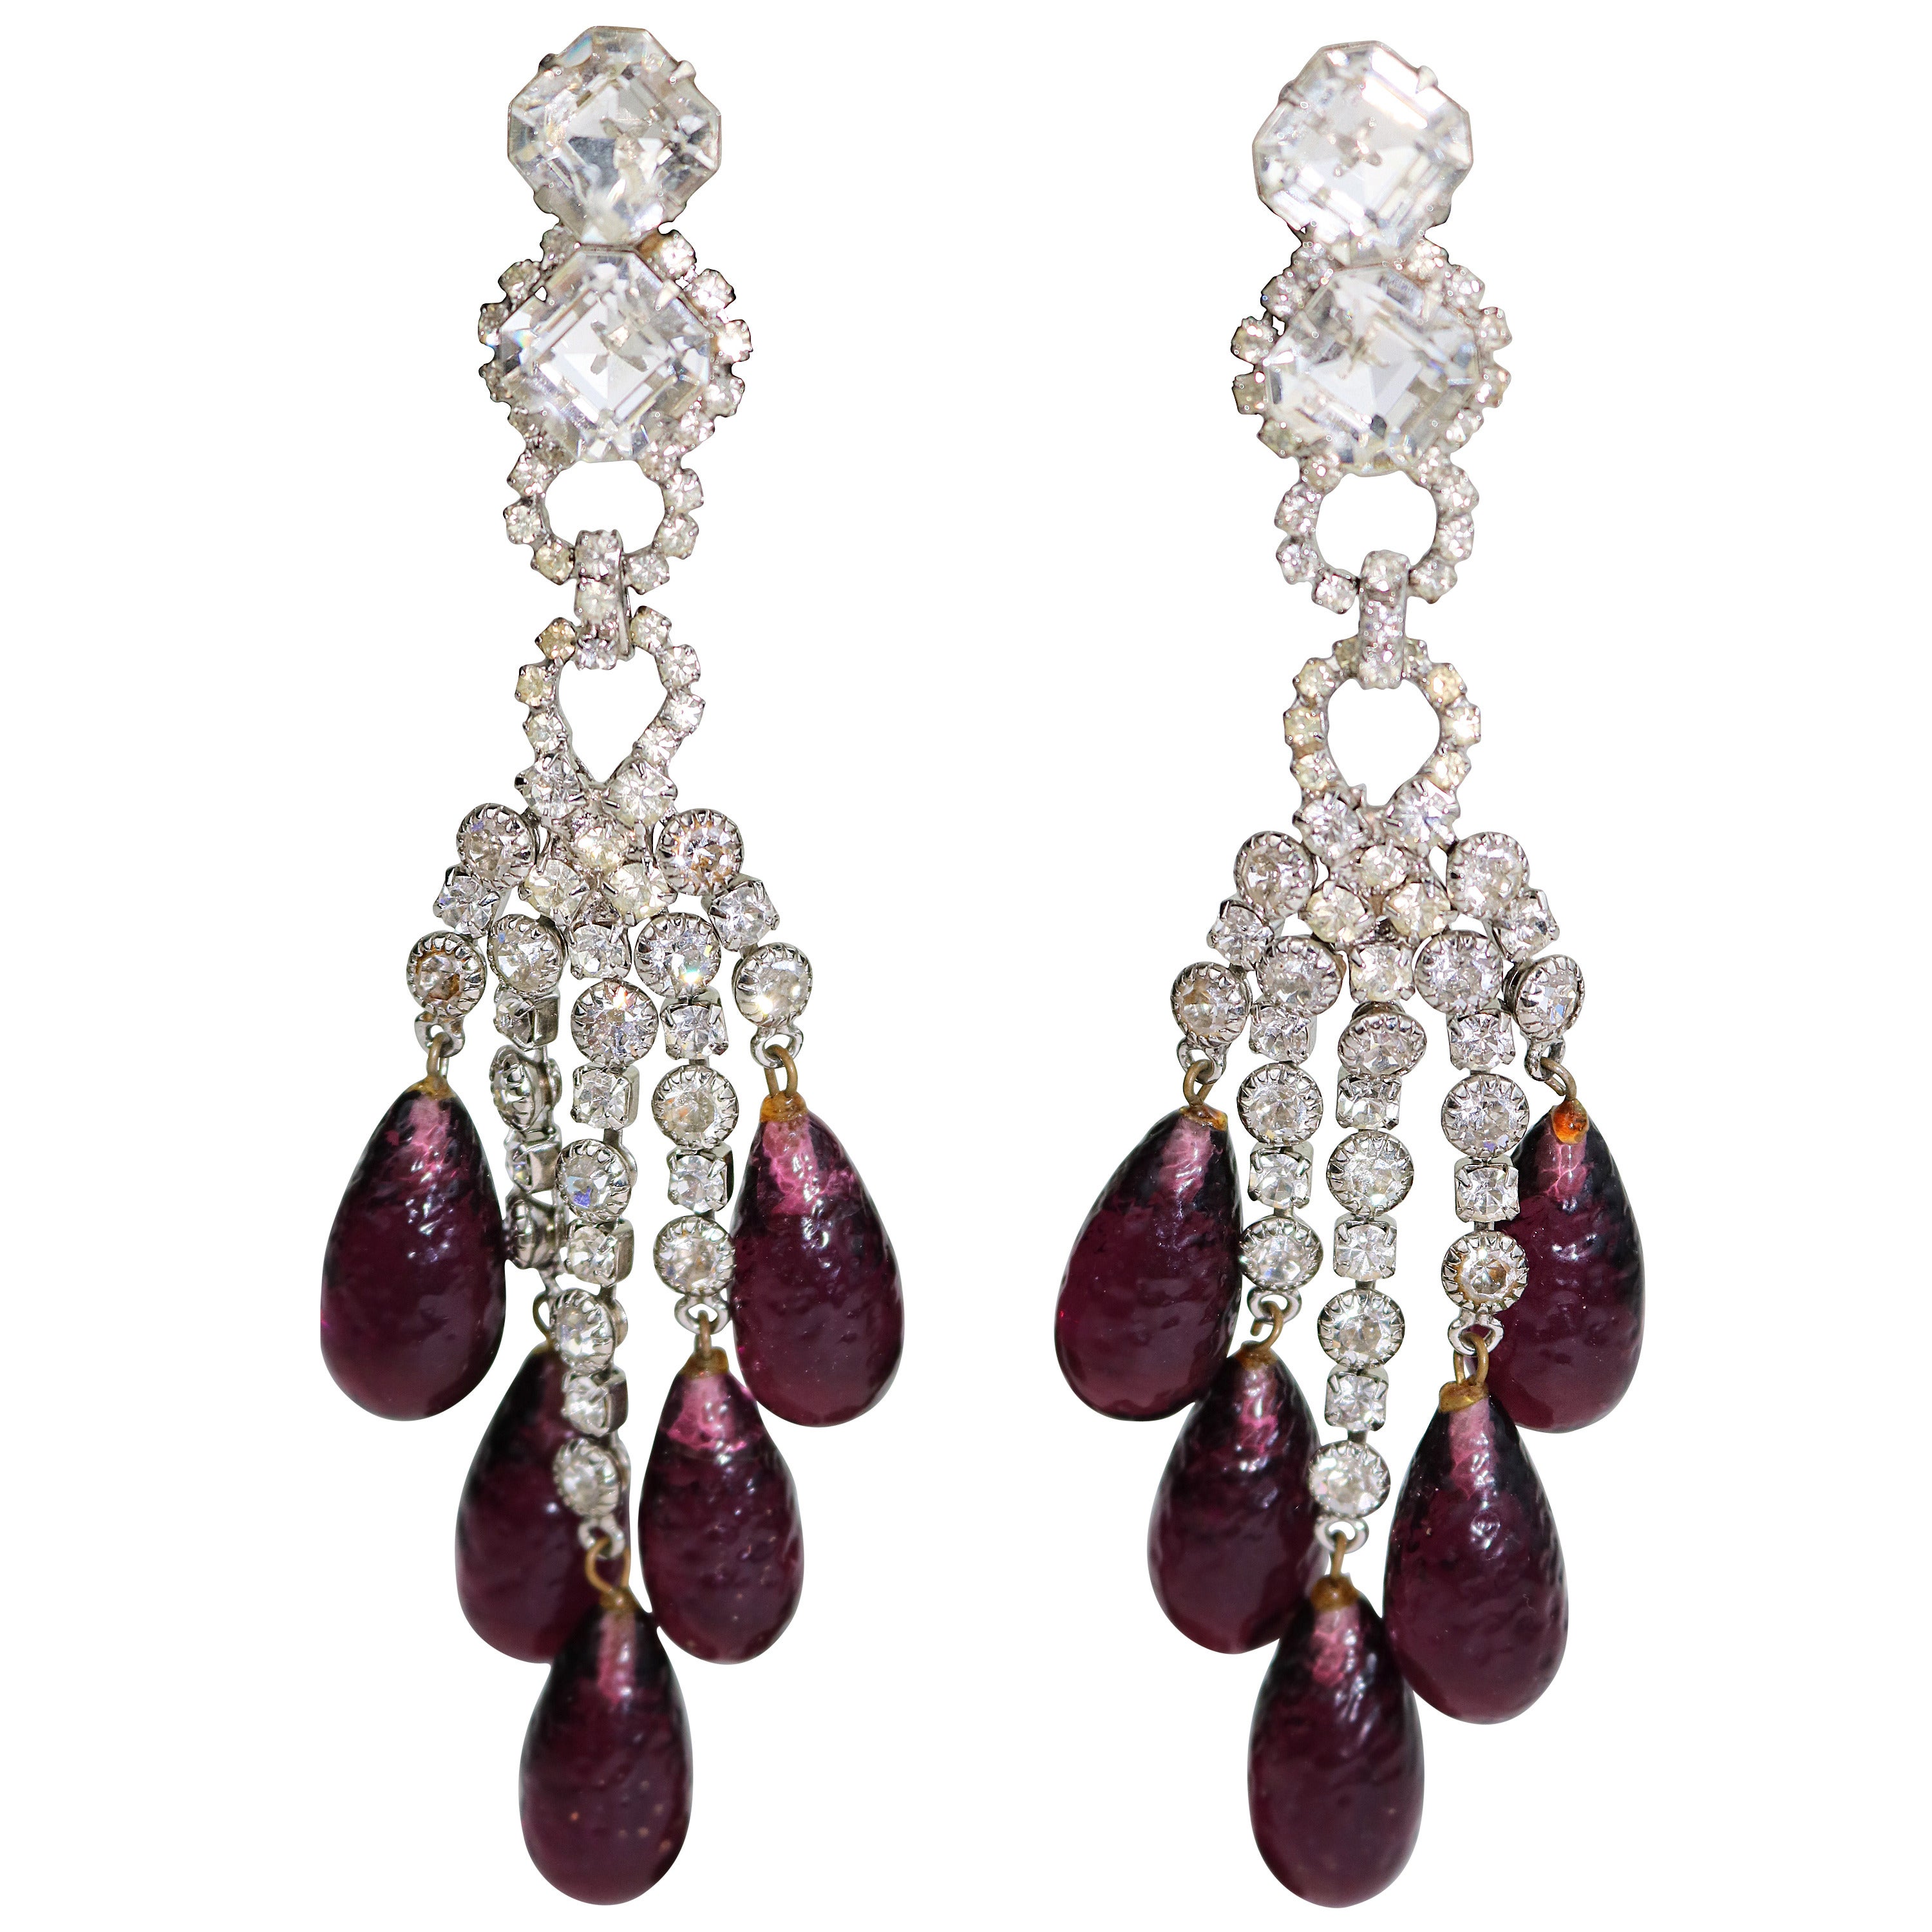 Amazing Robert Sorrell Faux Diamond and Amethyst Chandelier Ear Clips For Sale